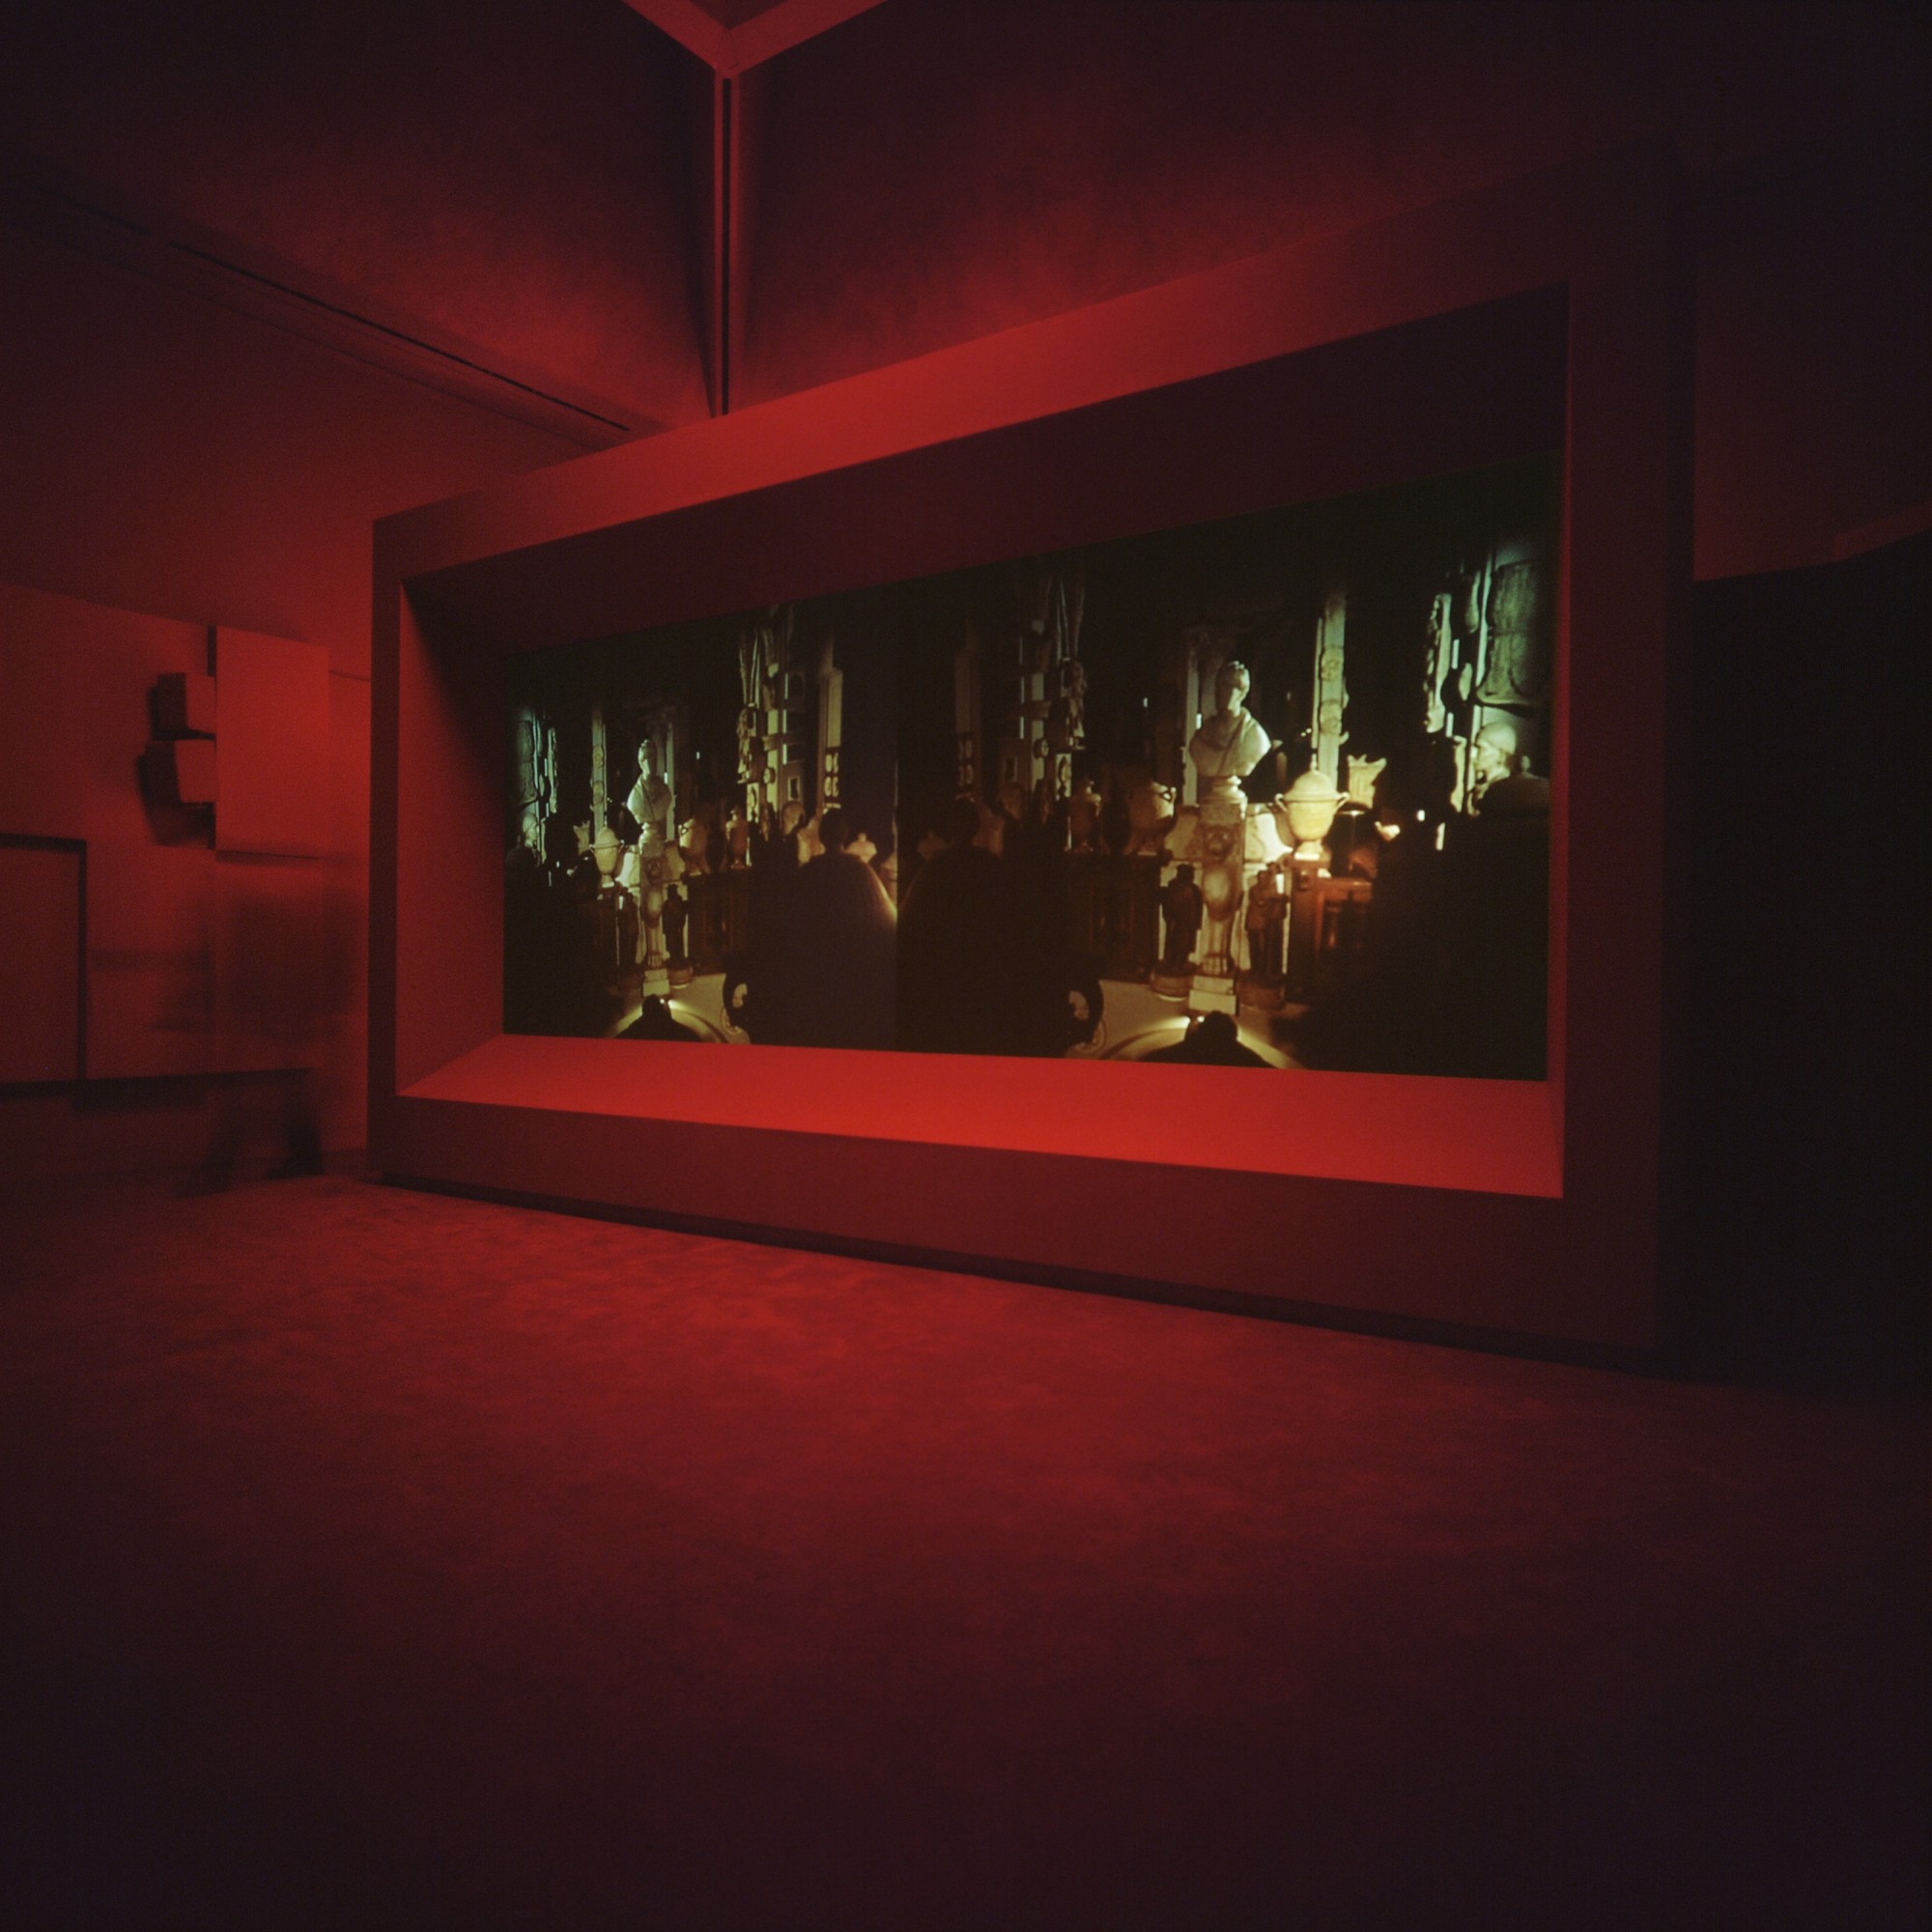 Turner Prize 2001. Tate Britain, London  7', double-screen projection, 16mm film transferred to digital, colour, sound